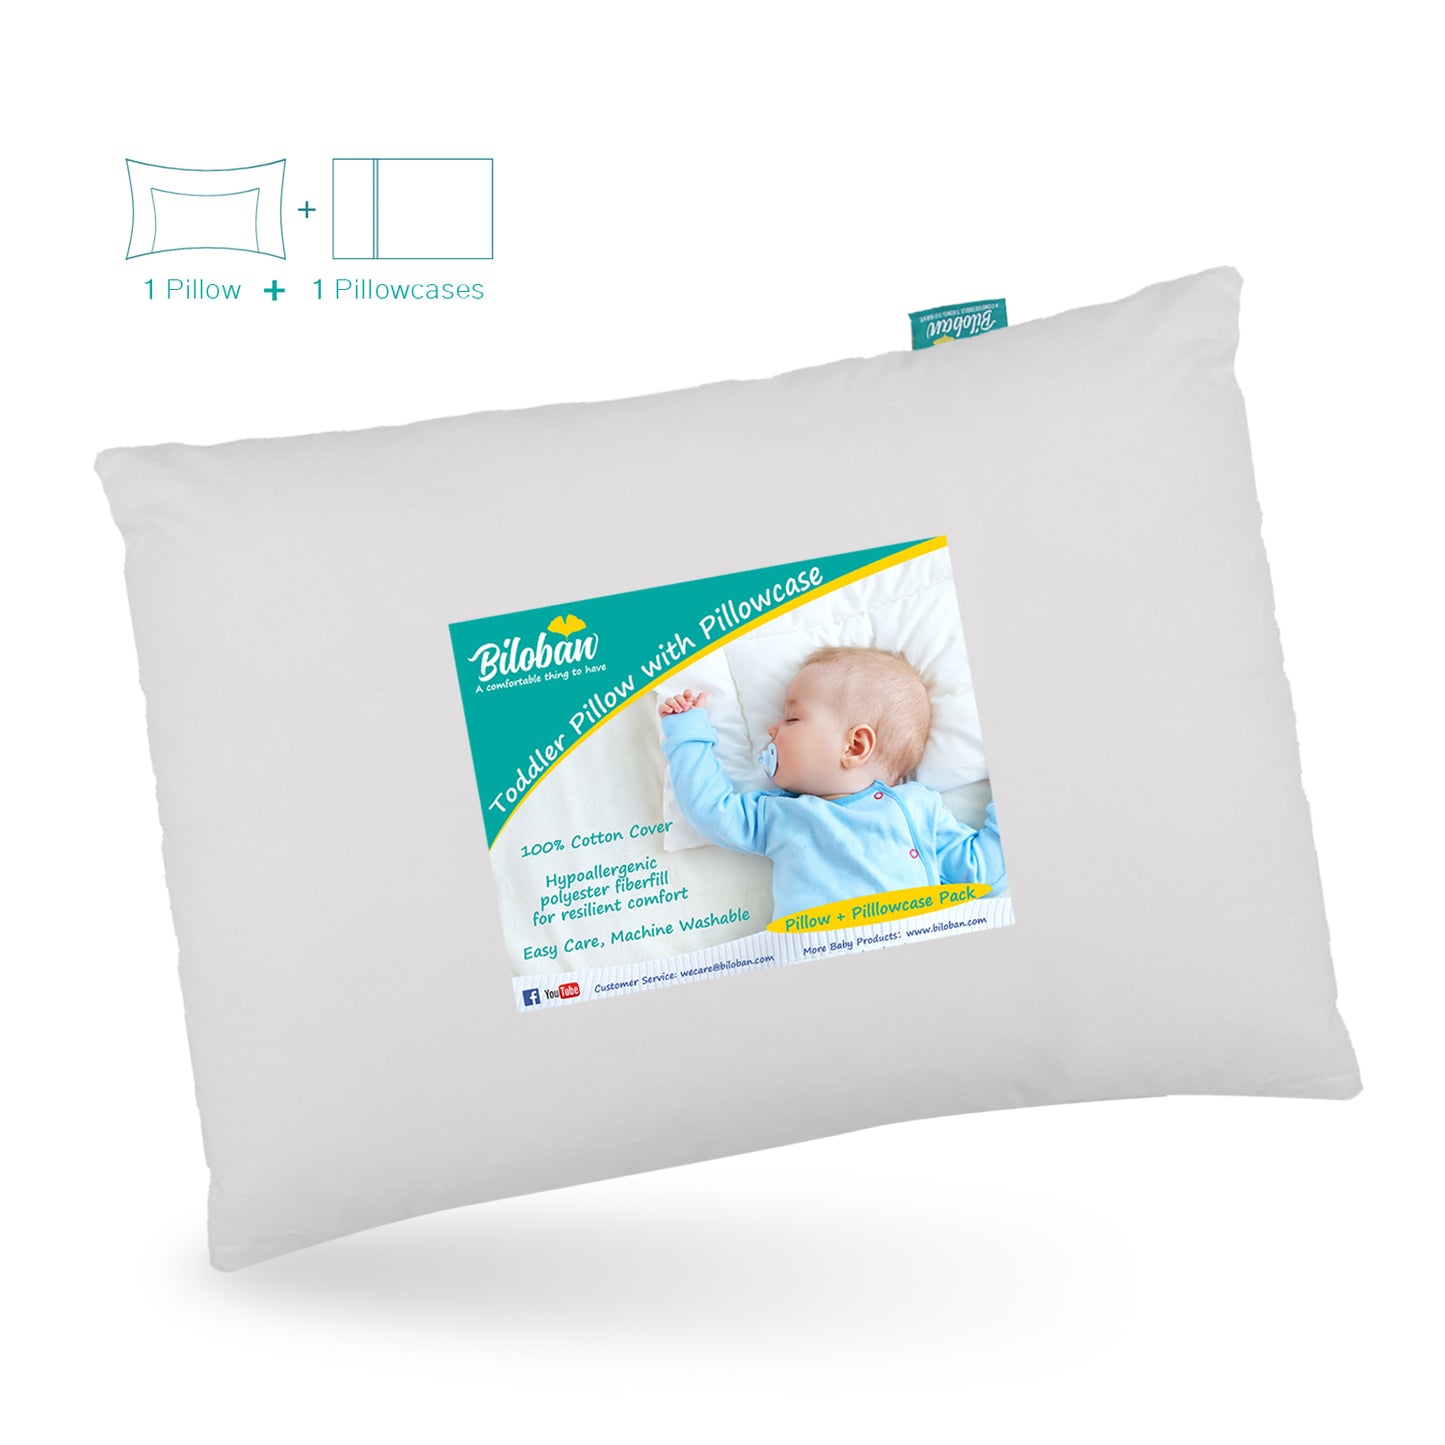 Toddler Pillow Quilted with Pillowcase - 13" x 18", 100% Cotton, Ultra Soft & Breathable, Grey - Biloban Online Store